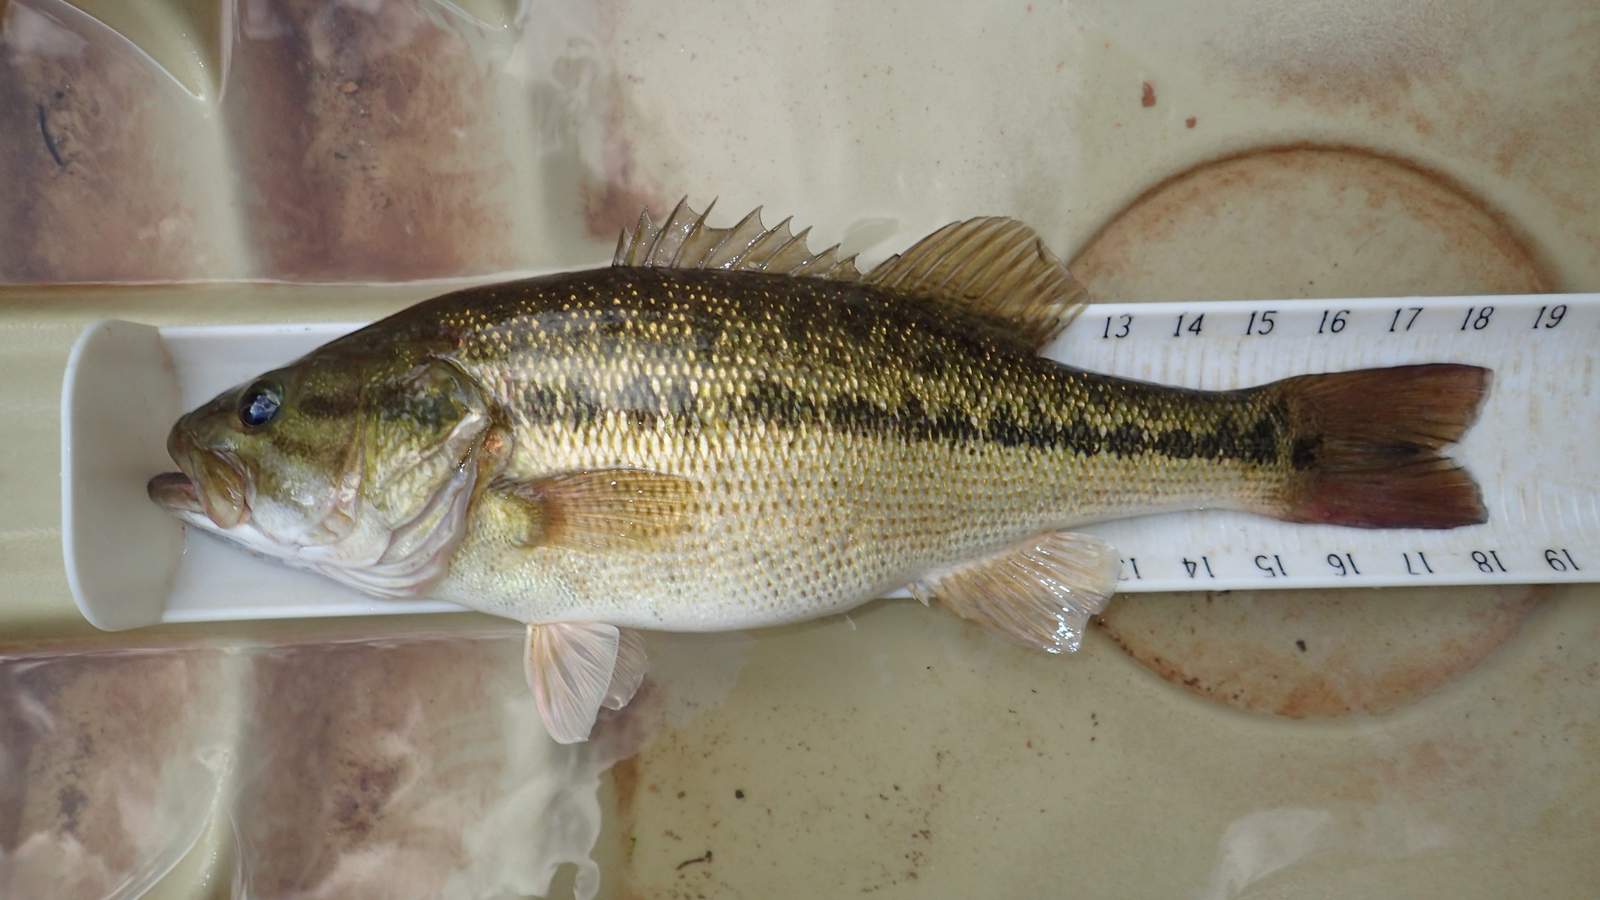 Alabama Bass in Virginia lakes are threatening state’s bass population